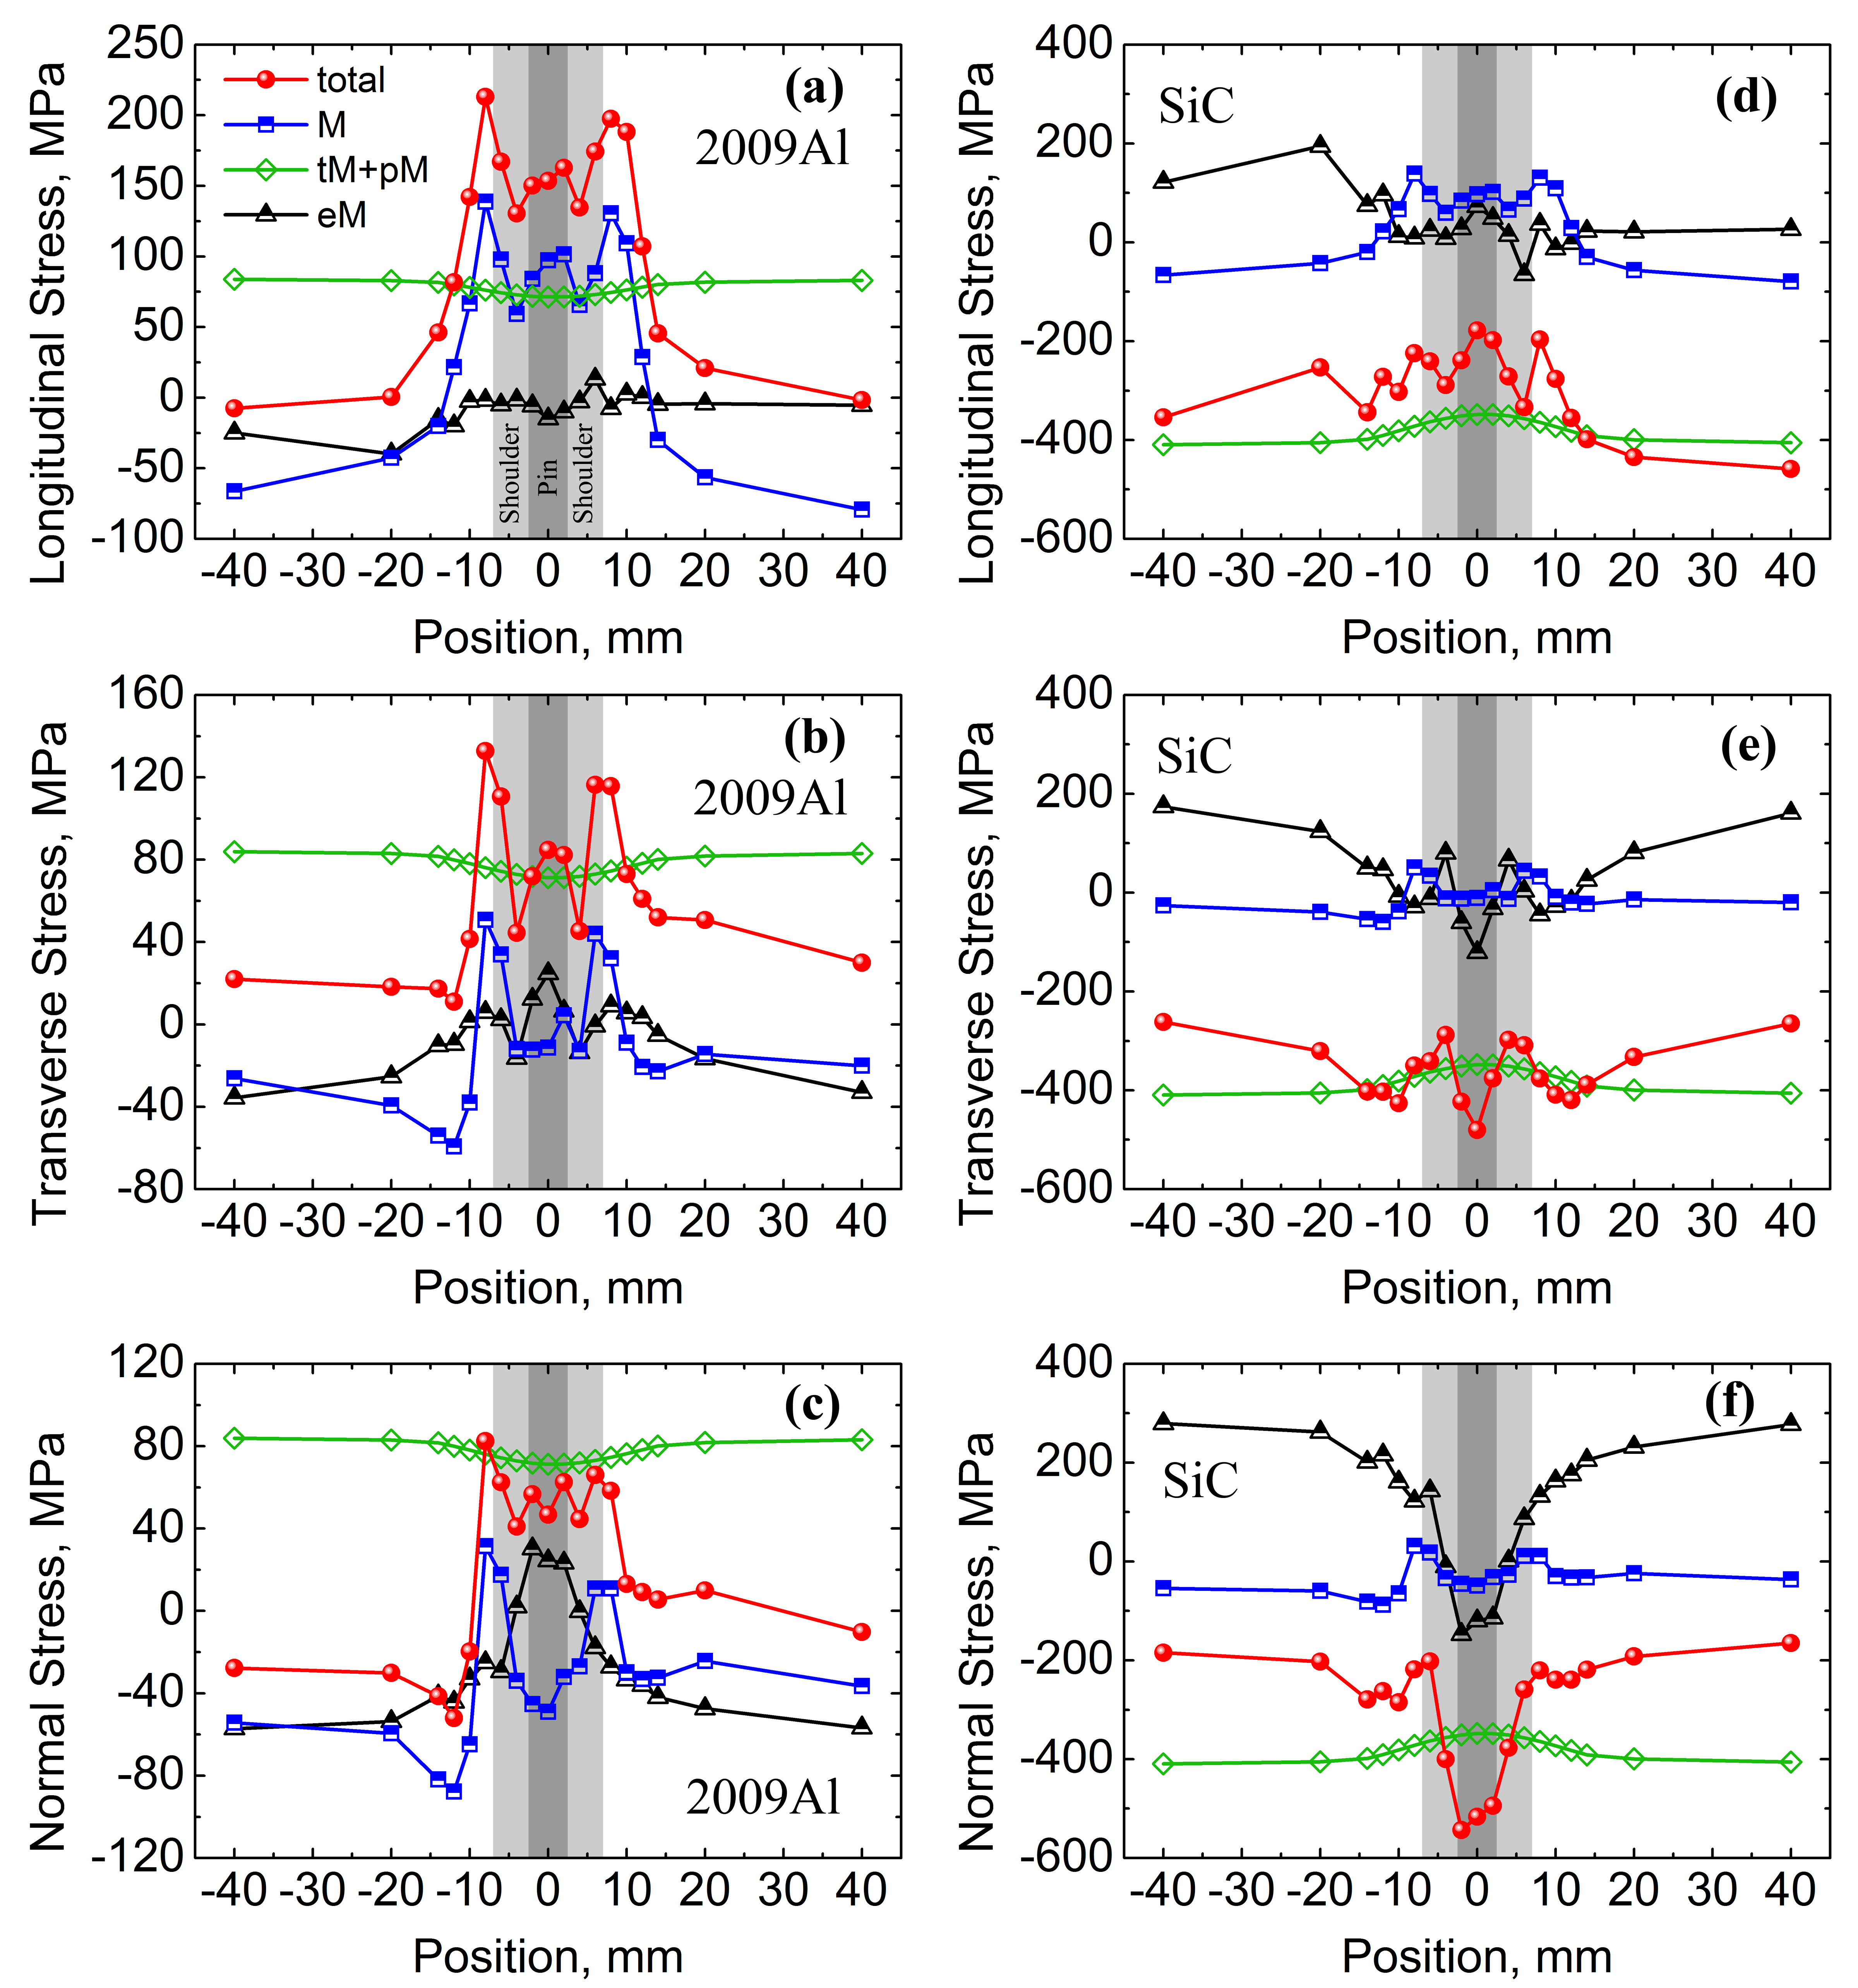 fig2: Macroscopic and microscopic residual stresses in friction stir welded metal matrix composites